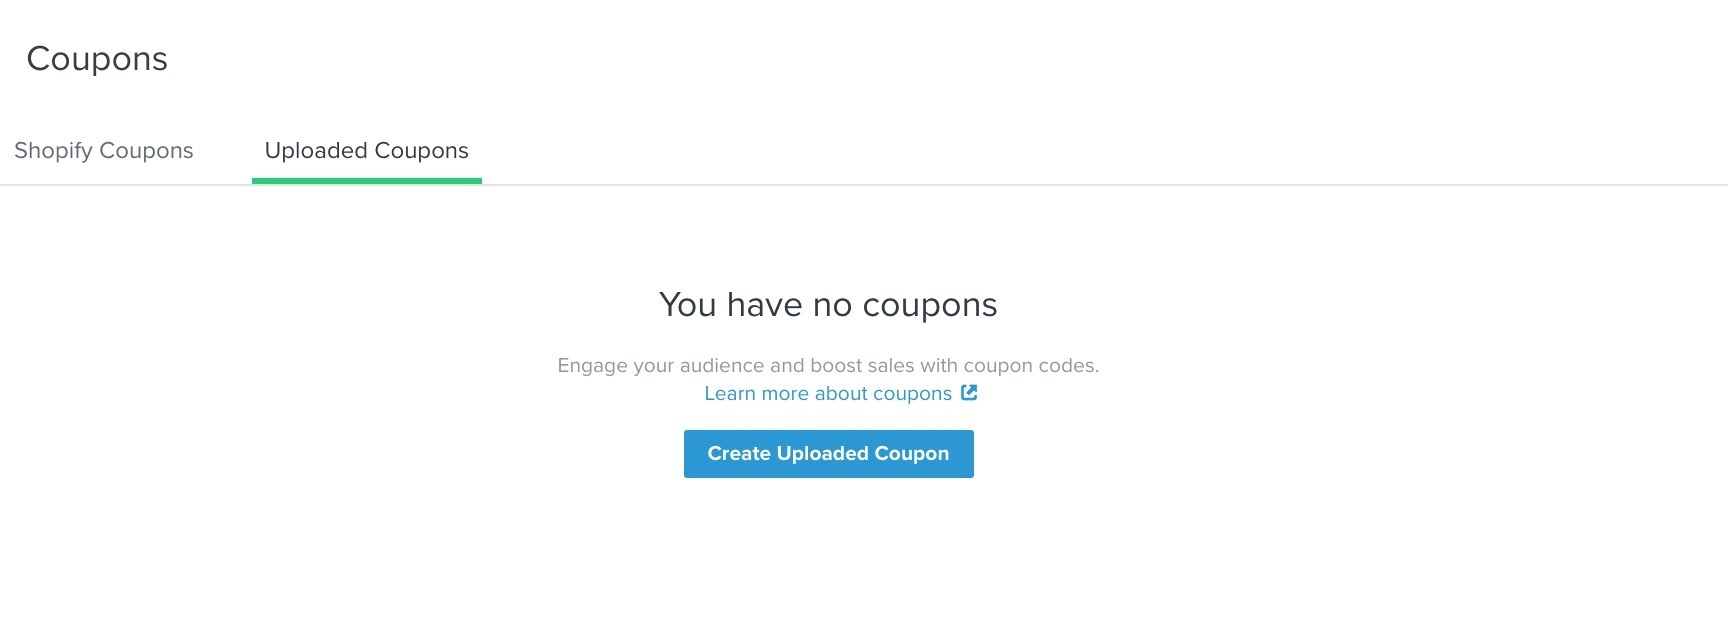 The uploaded coupons tab in Klaviyo showing 0 coupons